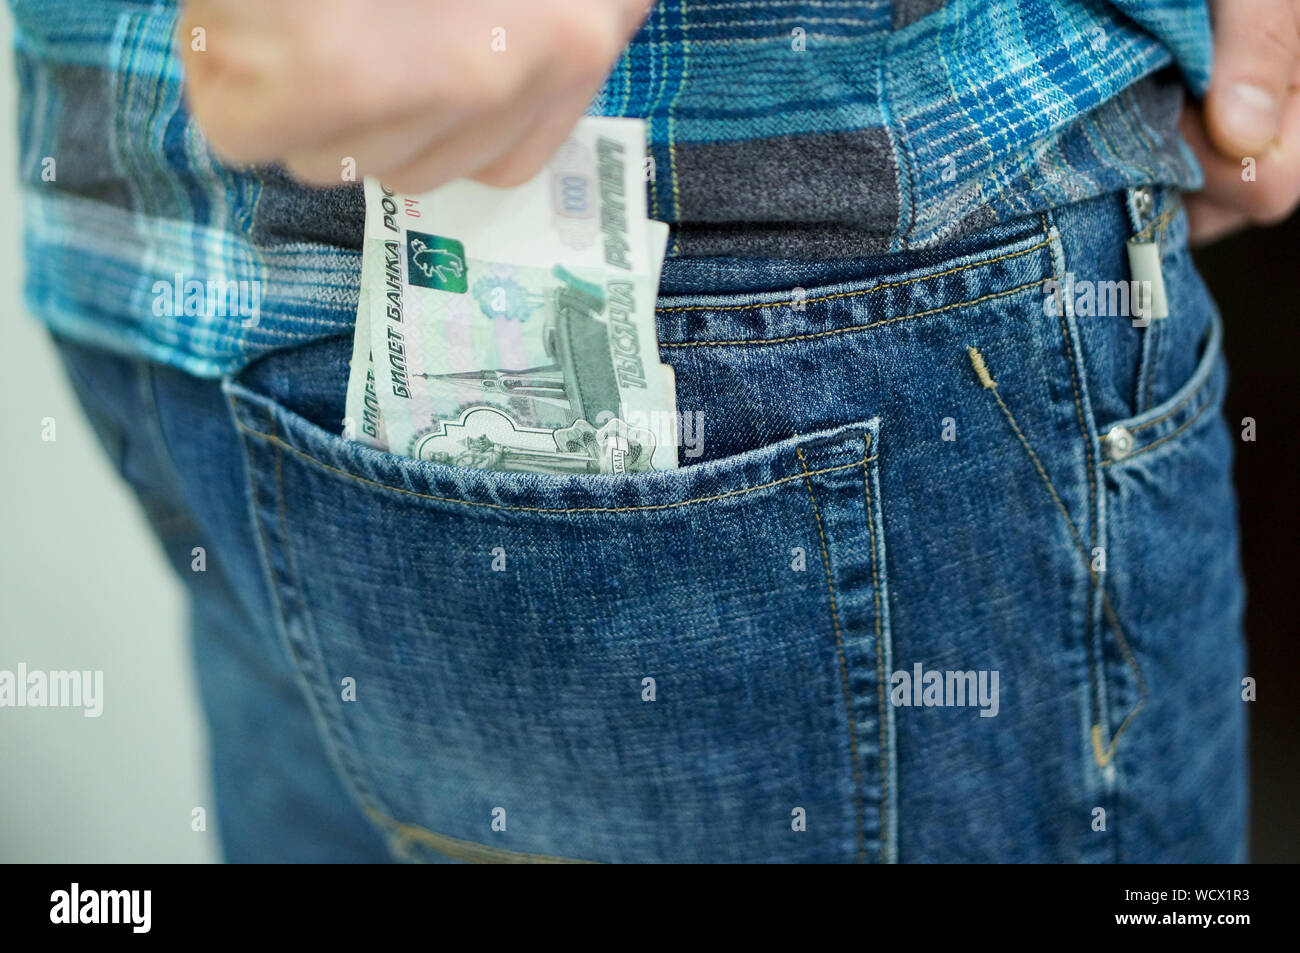 Midsection Of Man Keeping Money In Pocket Stock Photo